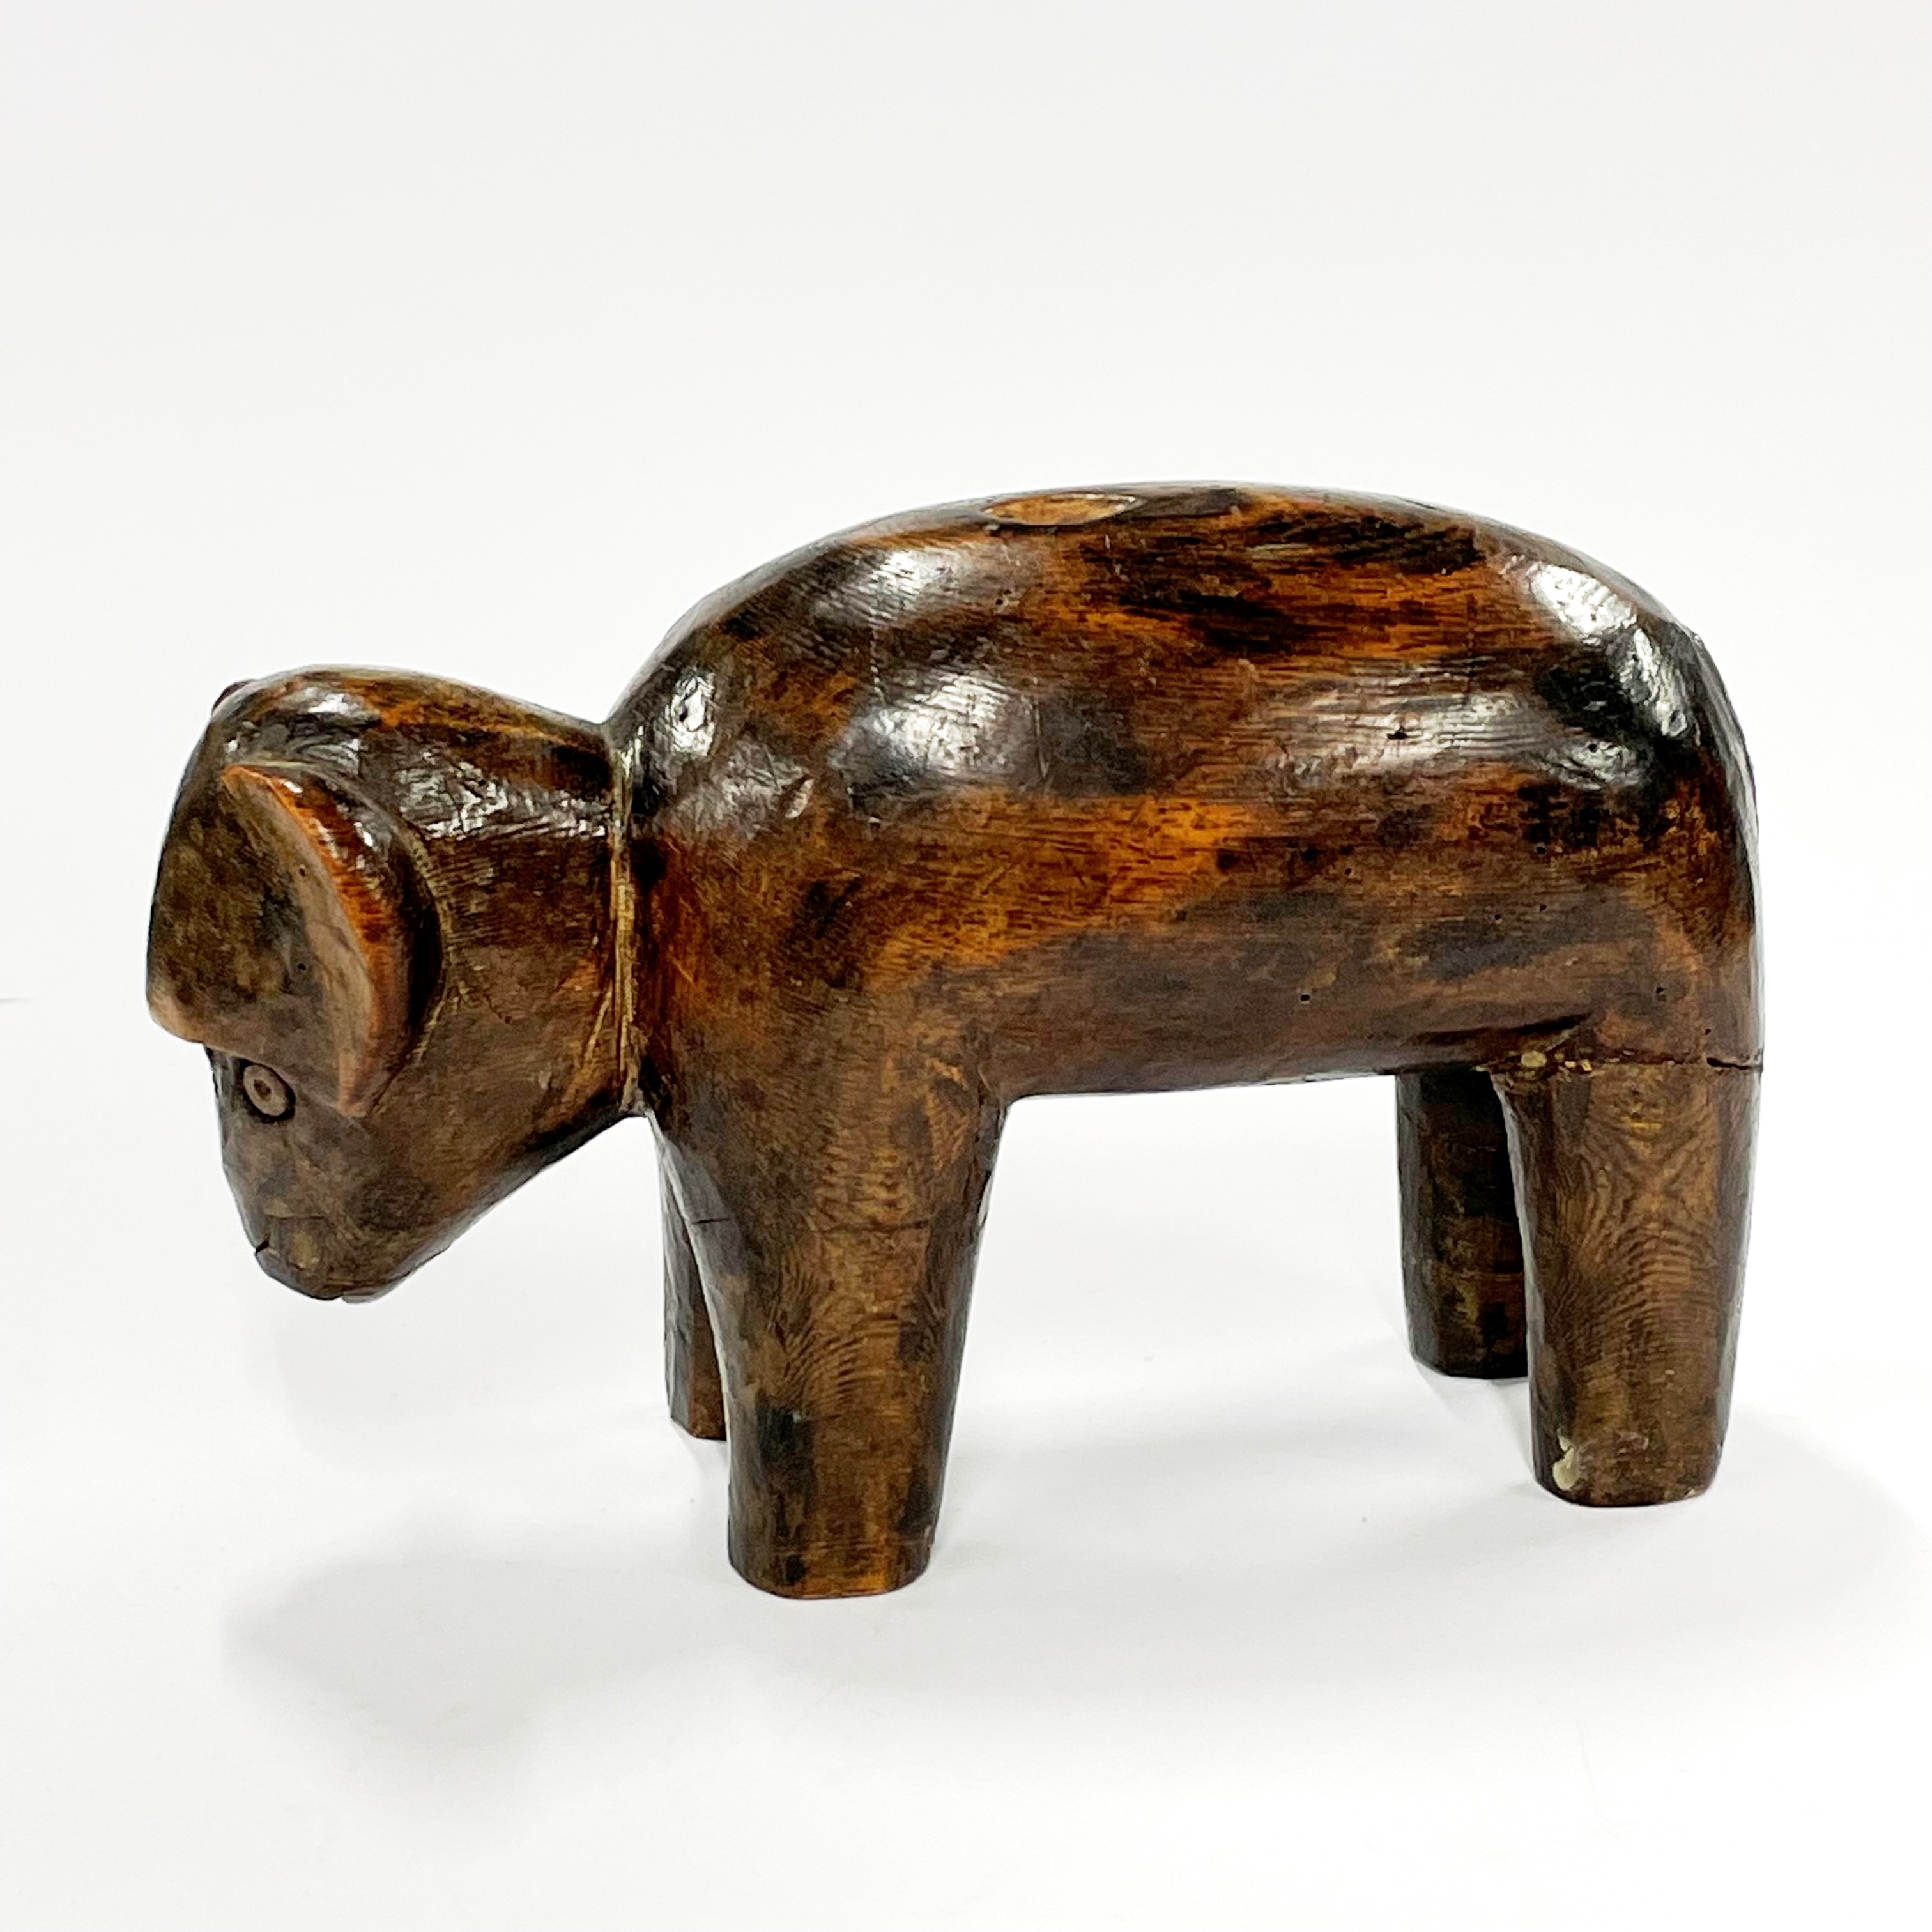 A 19th / early 20th century African tribal carved wooden bull figure, L. 18cm, H. 12cm. Some